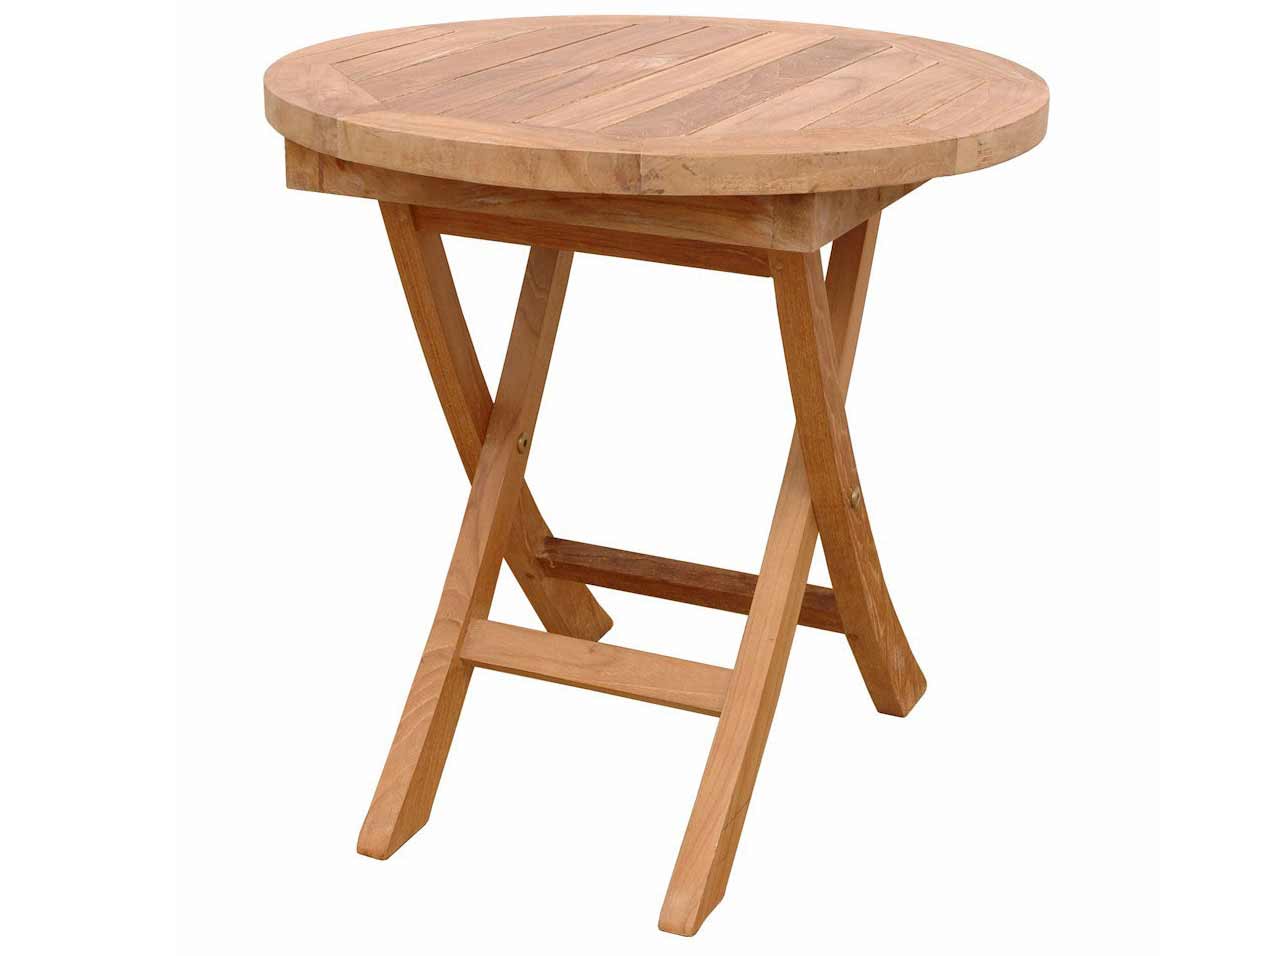 table kmart plans diy outdoor furniture white shaker and square ana small adirondack cedar bedside metal footstool wood wooden woodworking simple ideas folding pallet side fine